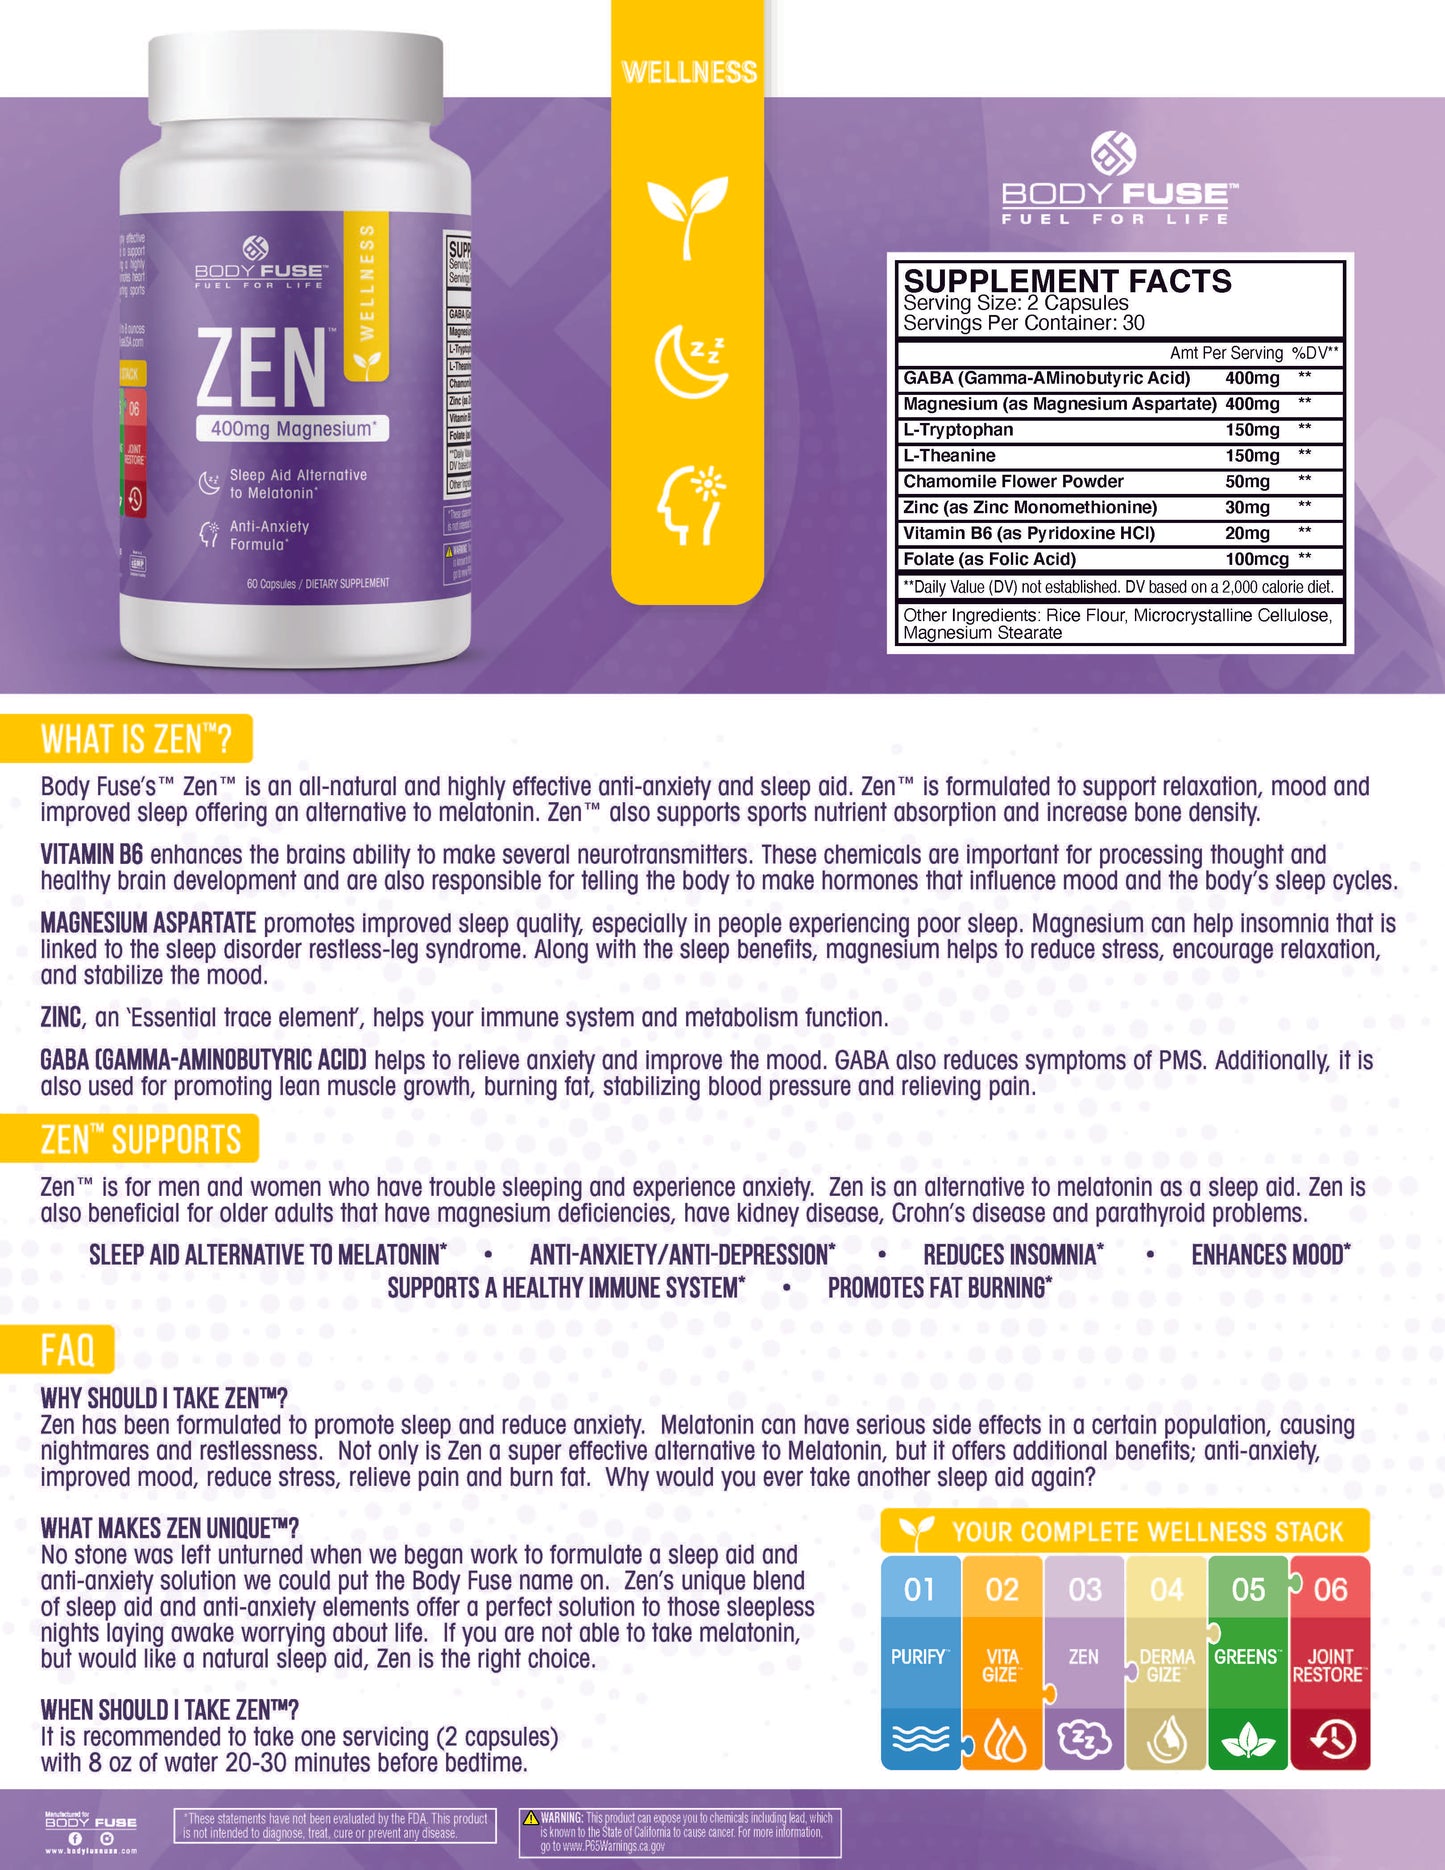 Zen | Magnesium Sleep Aid and Anti-Anxiety | 30 Servings